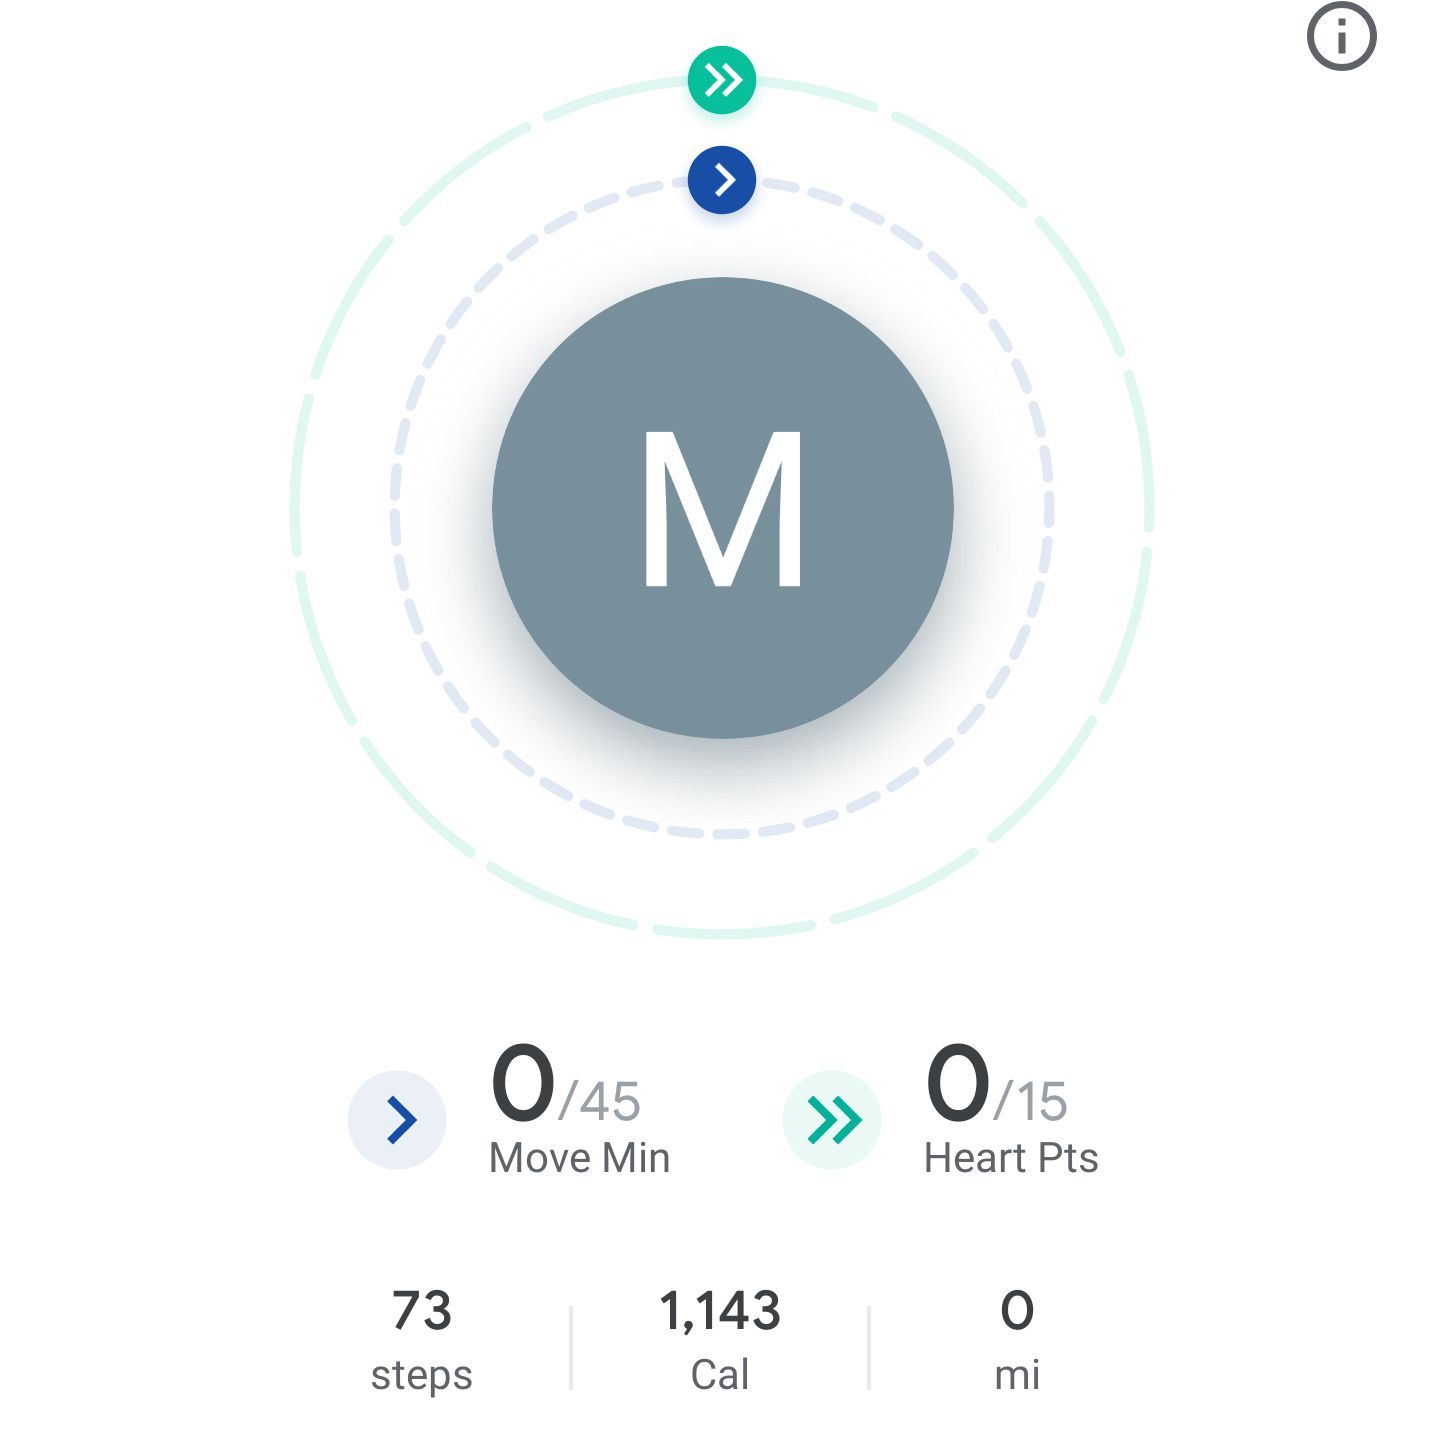 Google Fit's main screen showing number of Move Minutes, Heart Points, and other data